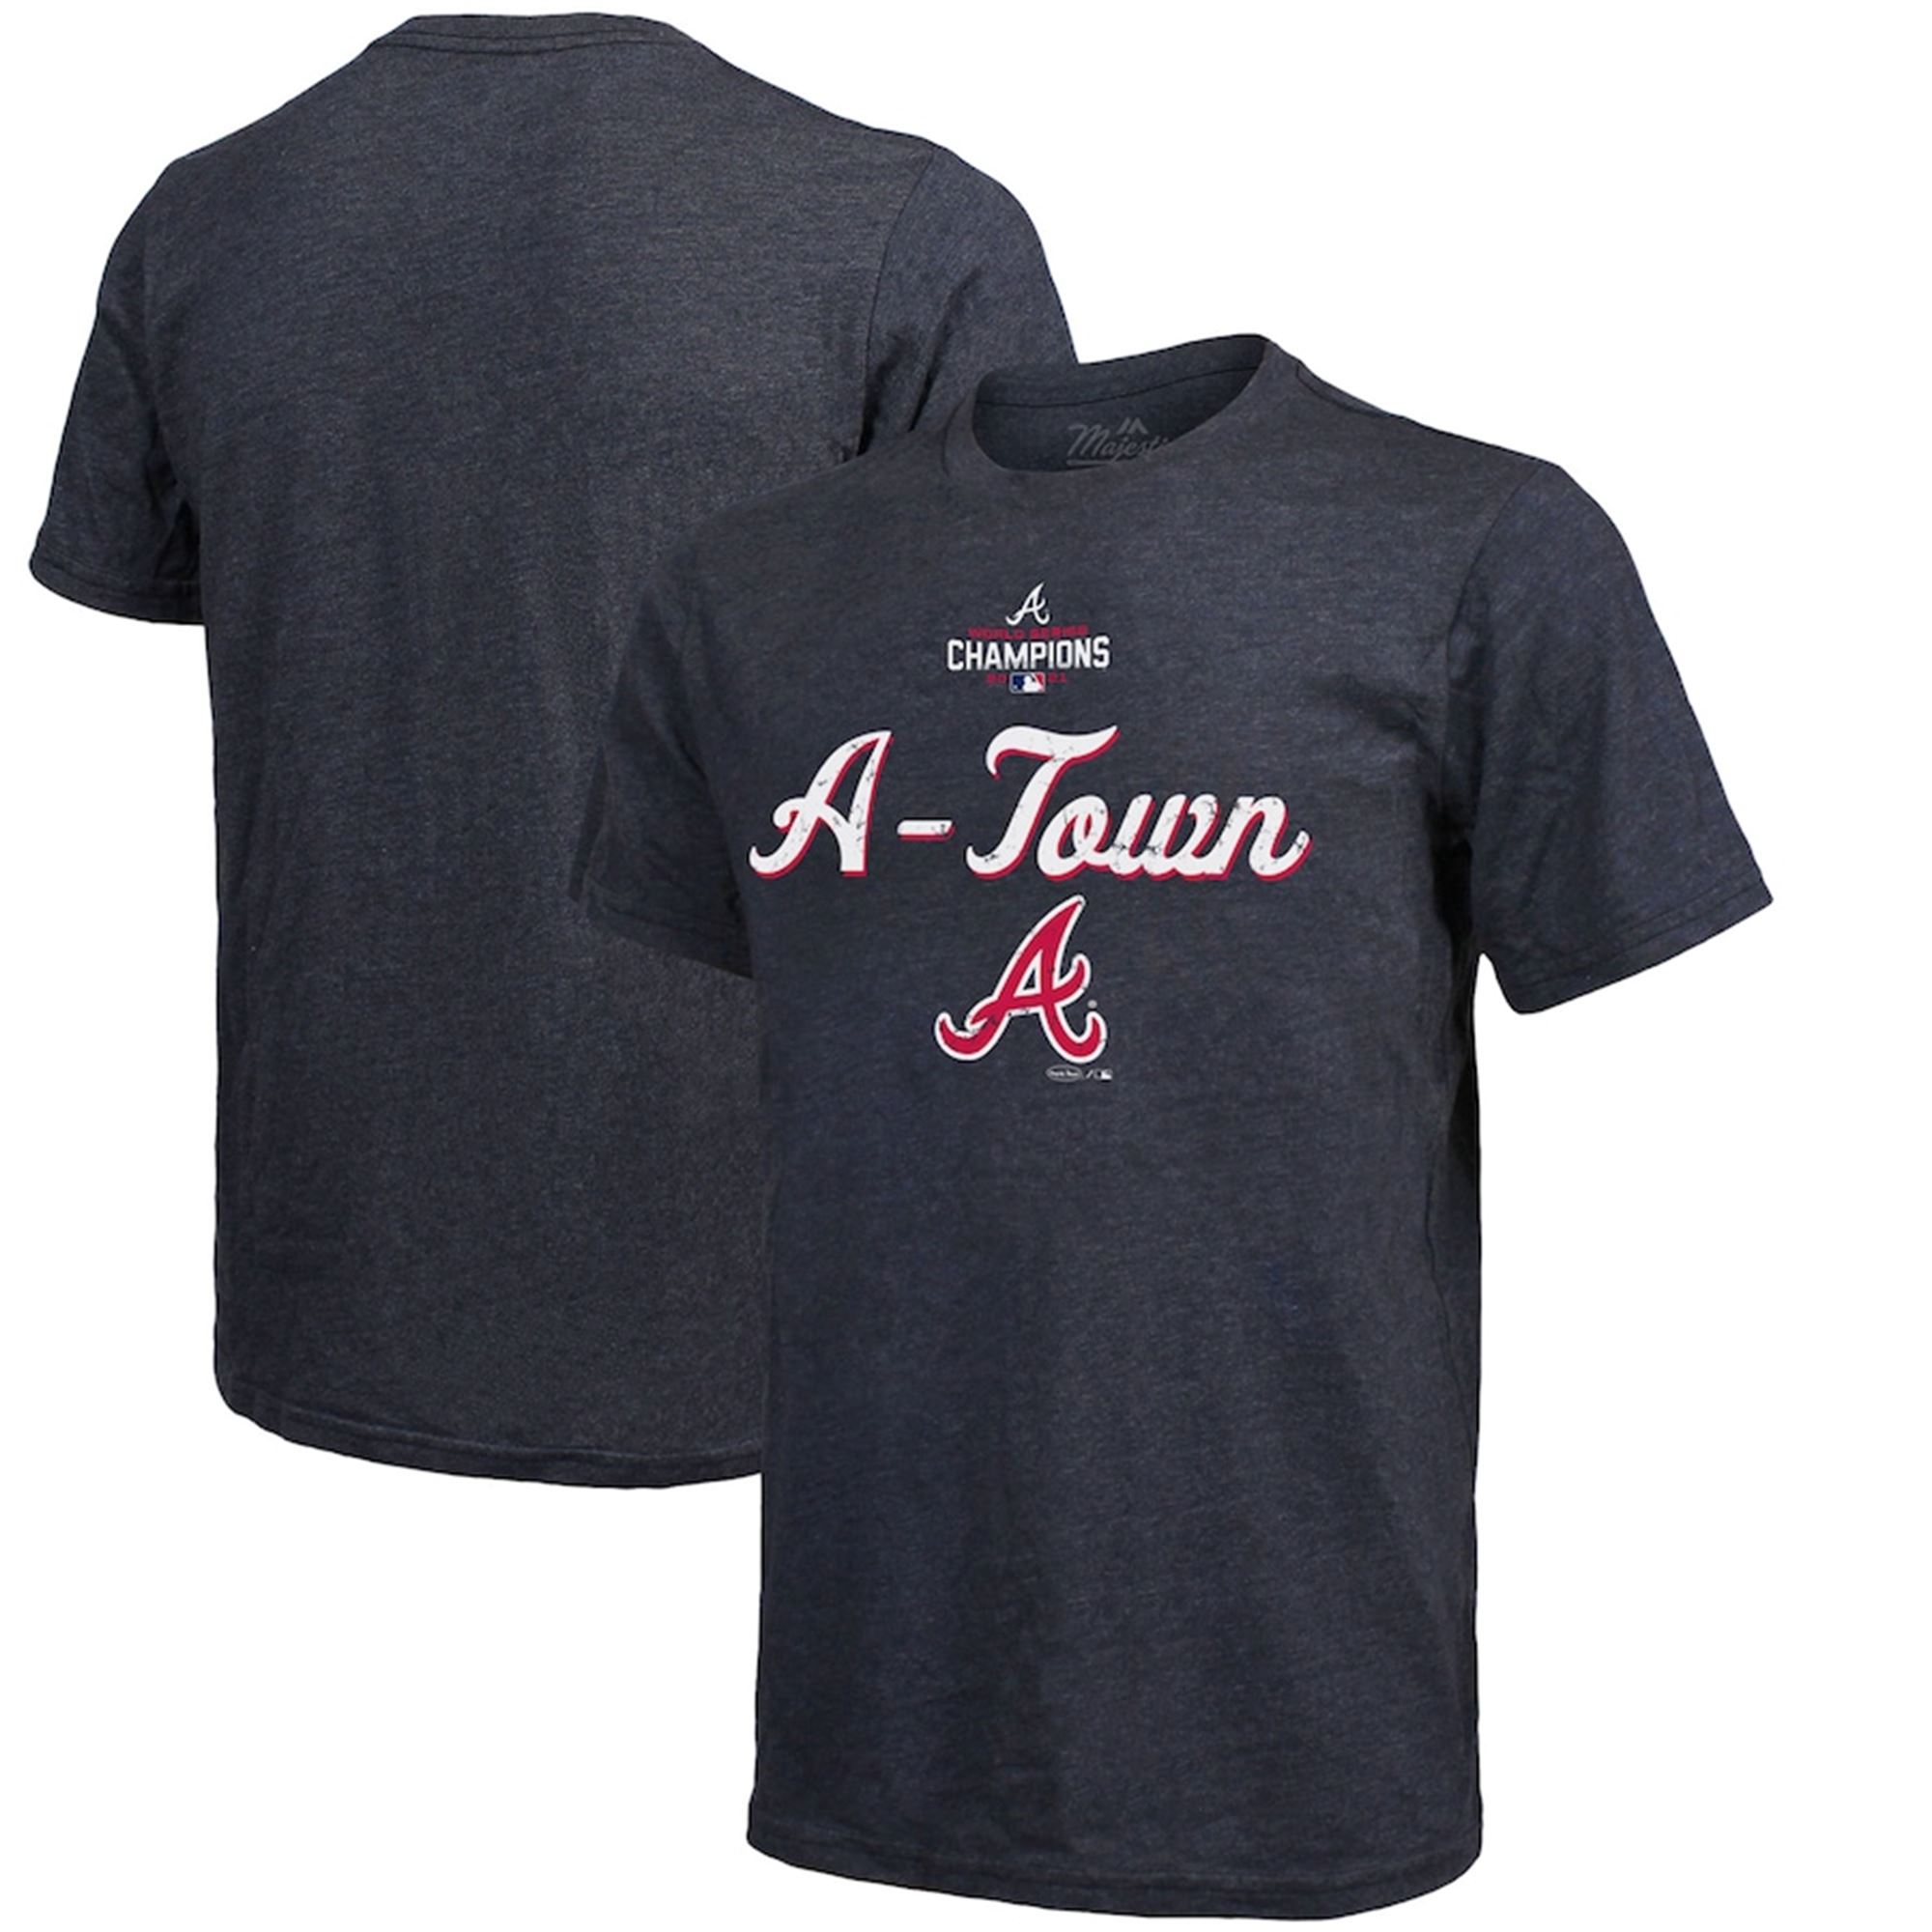 Atlanta Braves Majestic Threads 2021 World Series Champions Team Saying T-shirt Full Size Up To 5xl